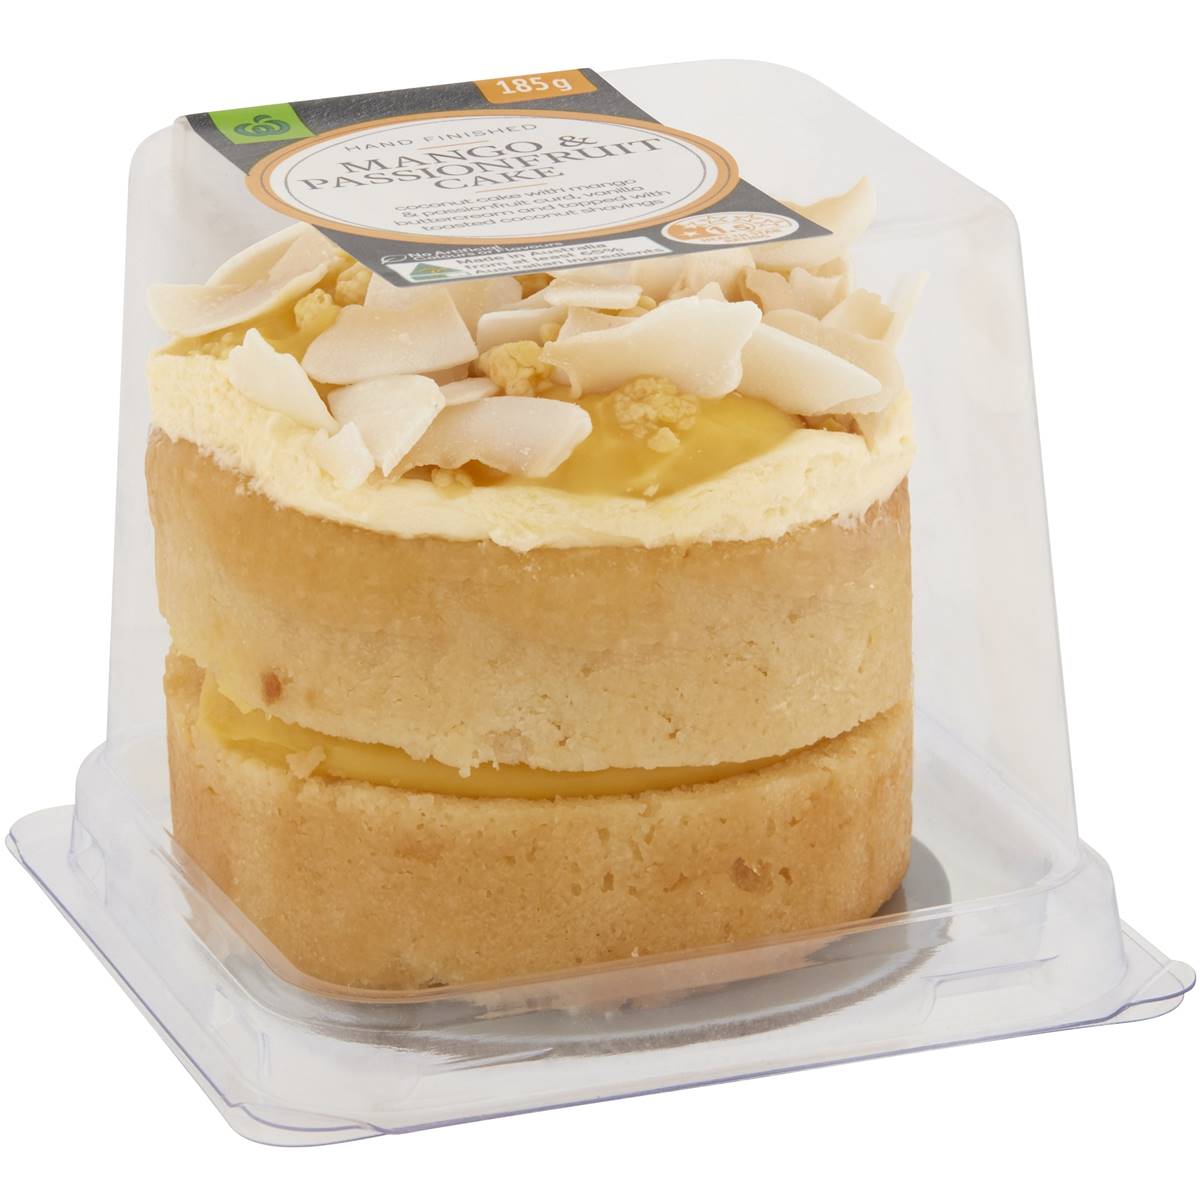 Calories in Woolworths Mango & Passionfruit Cake